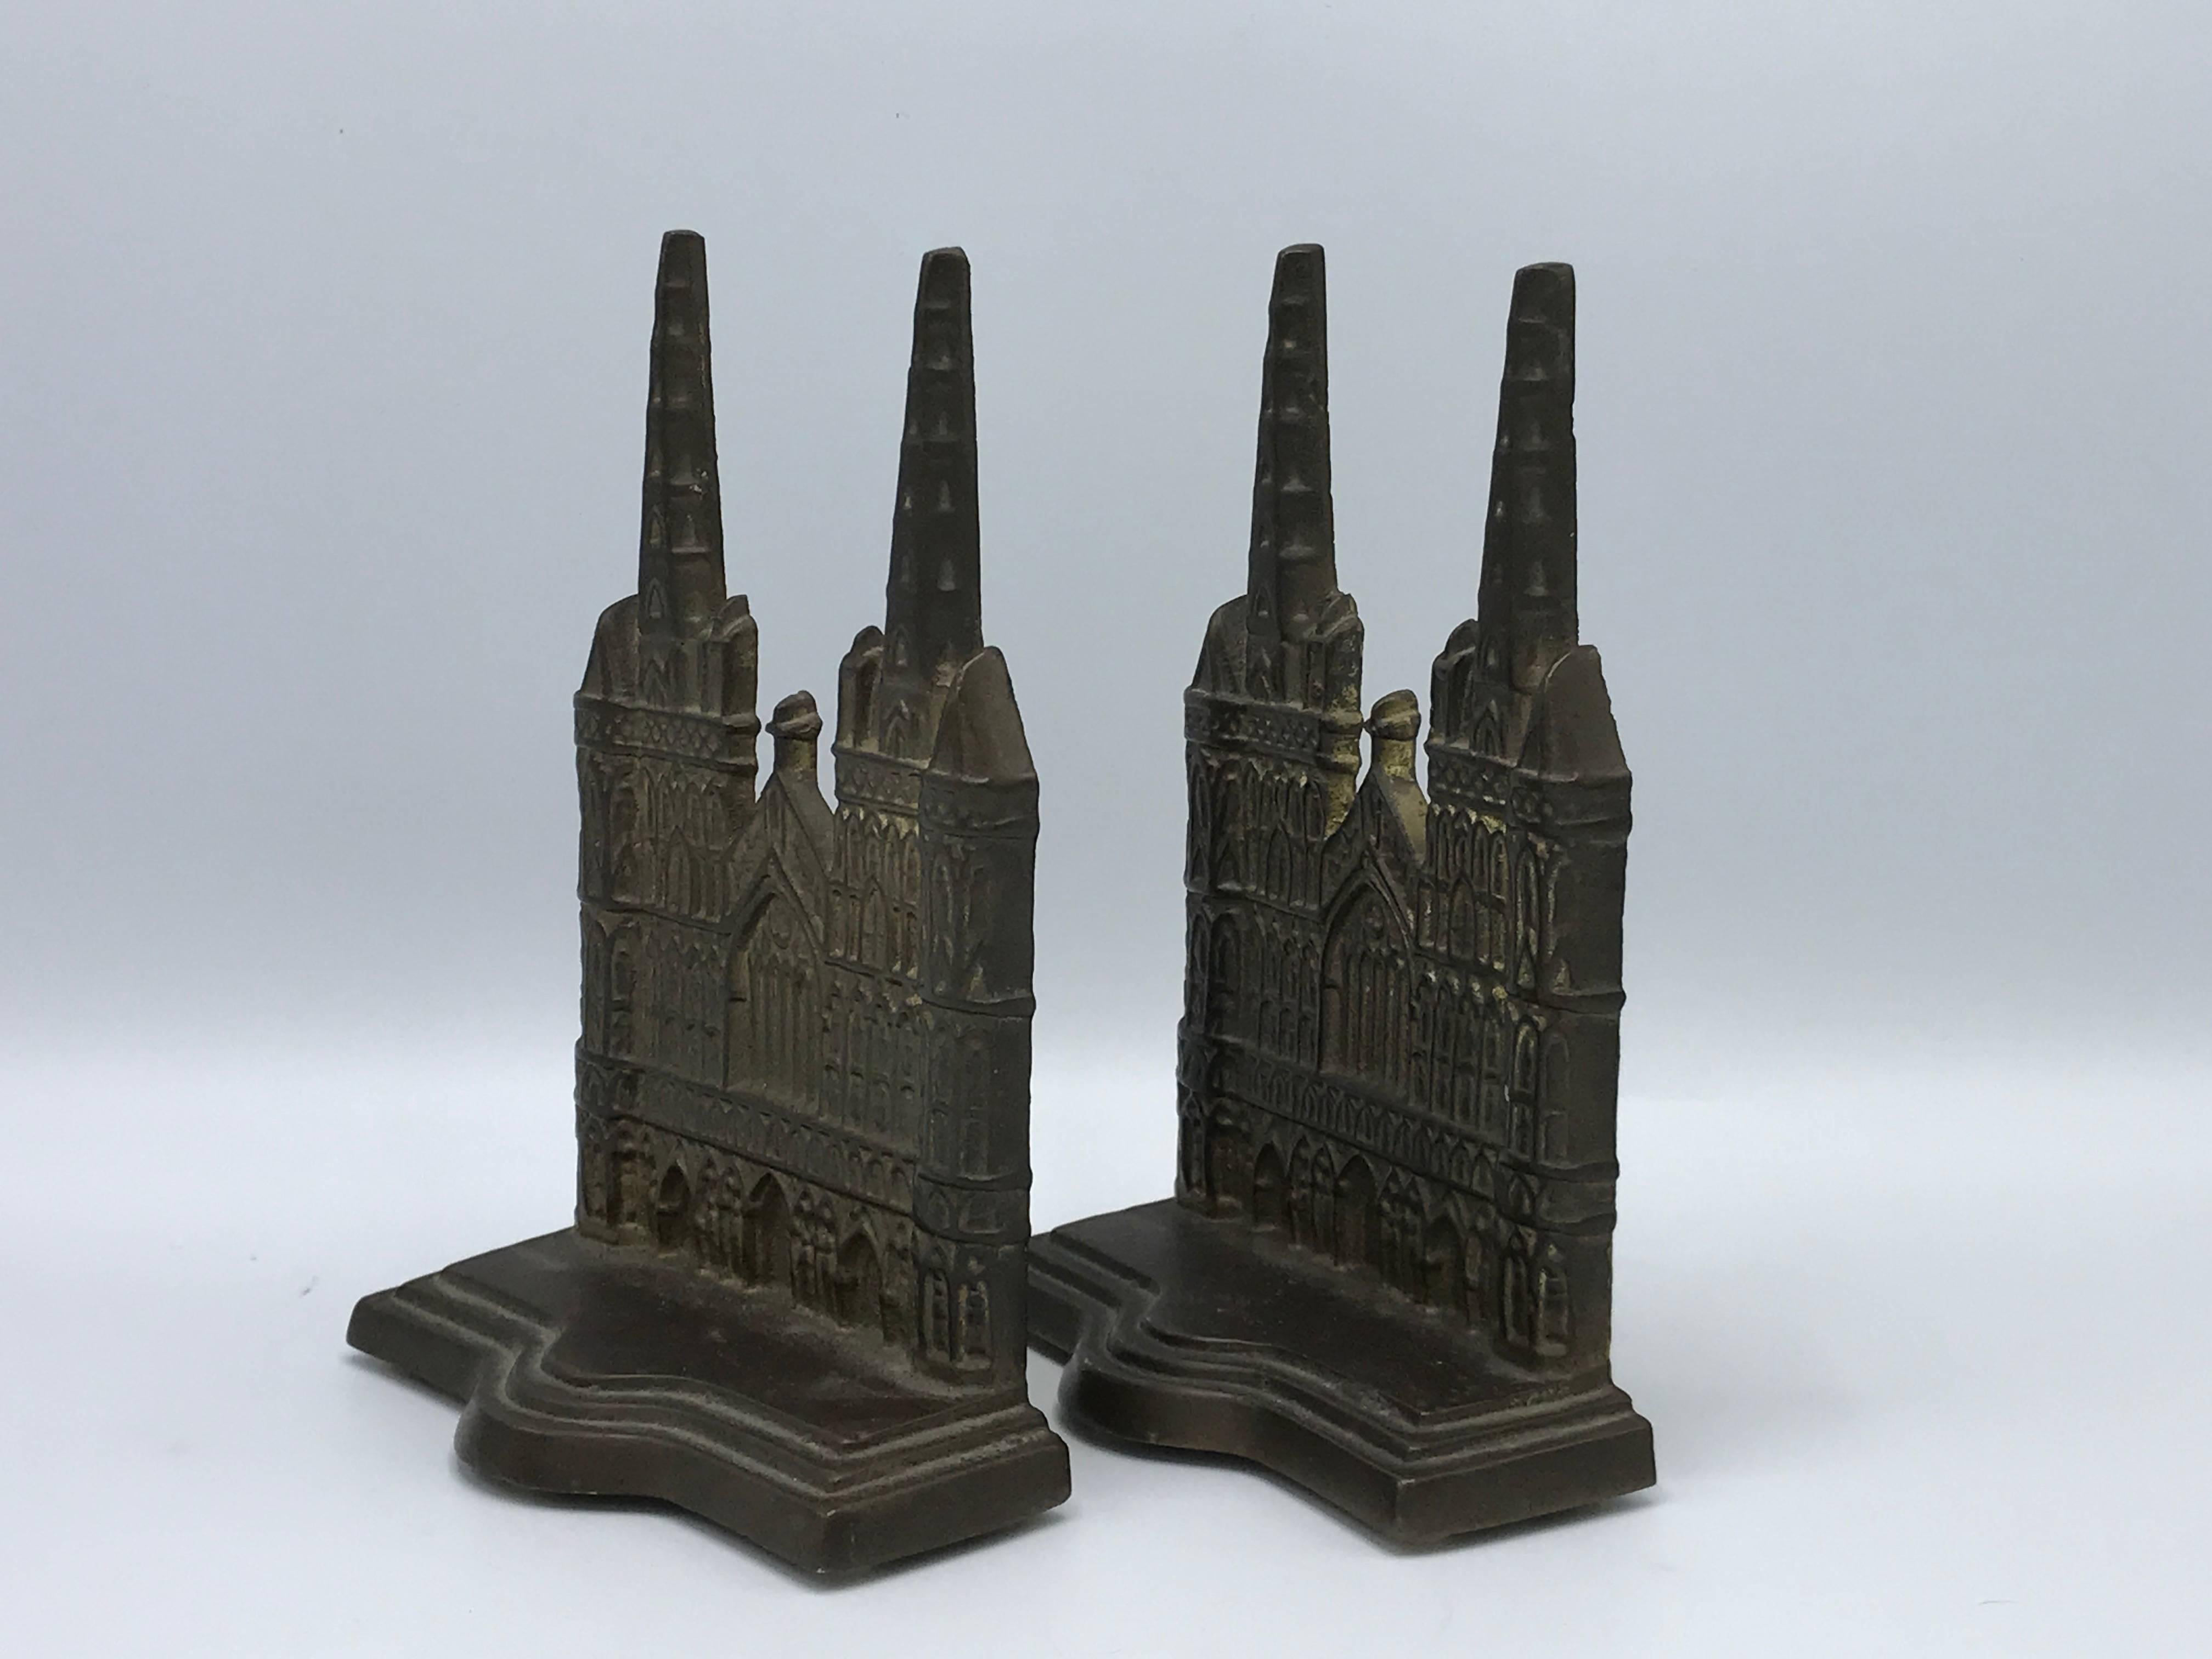 Offered is a gorgeous, pair of 1960s cast-bronze Litchfield Cathedral Church bookends. Incredibly detailed. Marked on backside of each. Heavy.